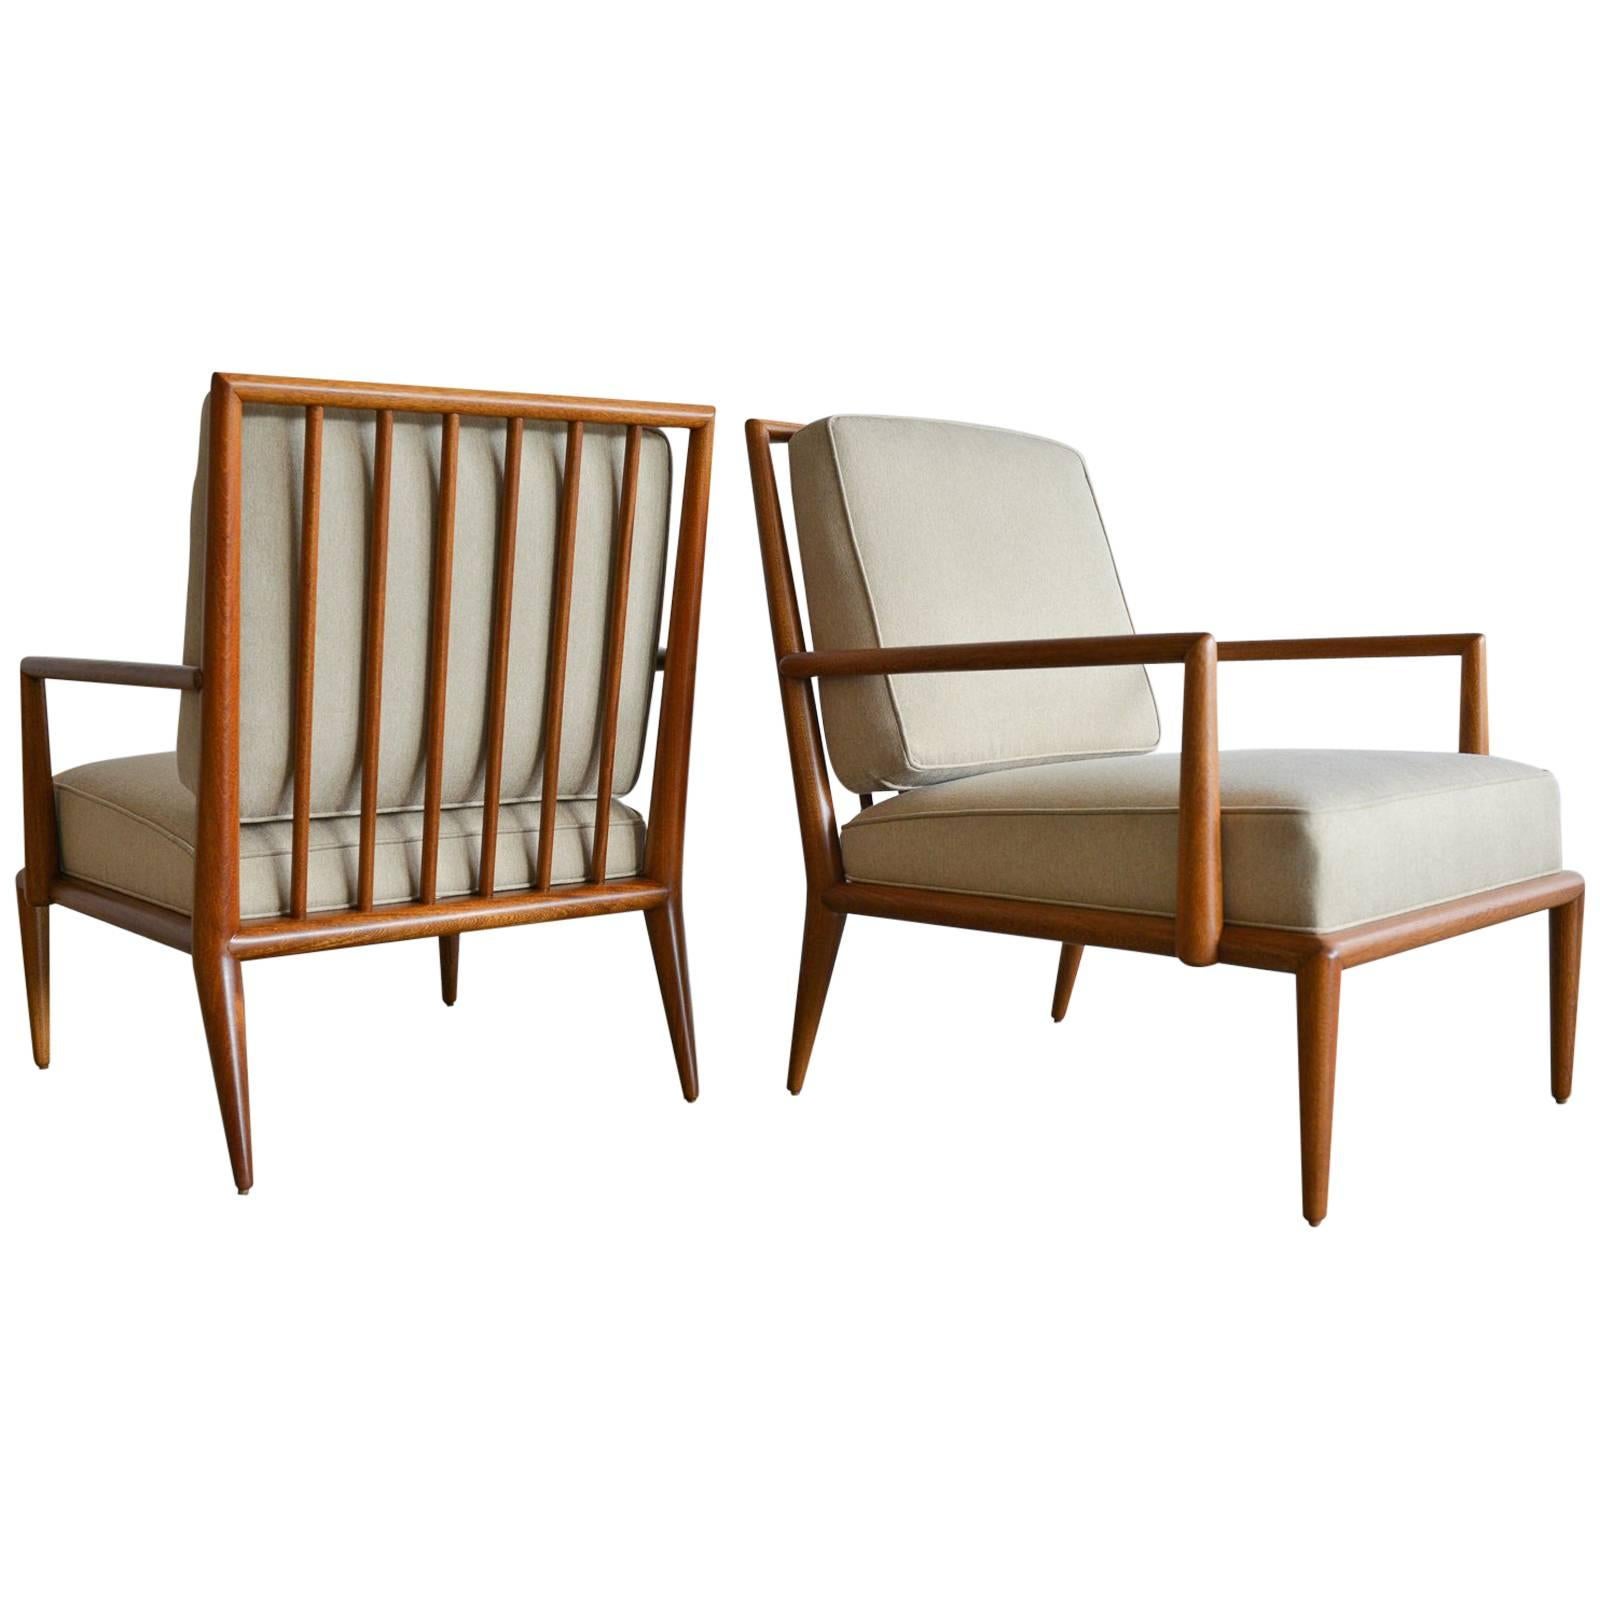 Pair of T.H. Robsjohn-Gibbings Spindle Back Lounge Chairs, circa 1950